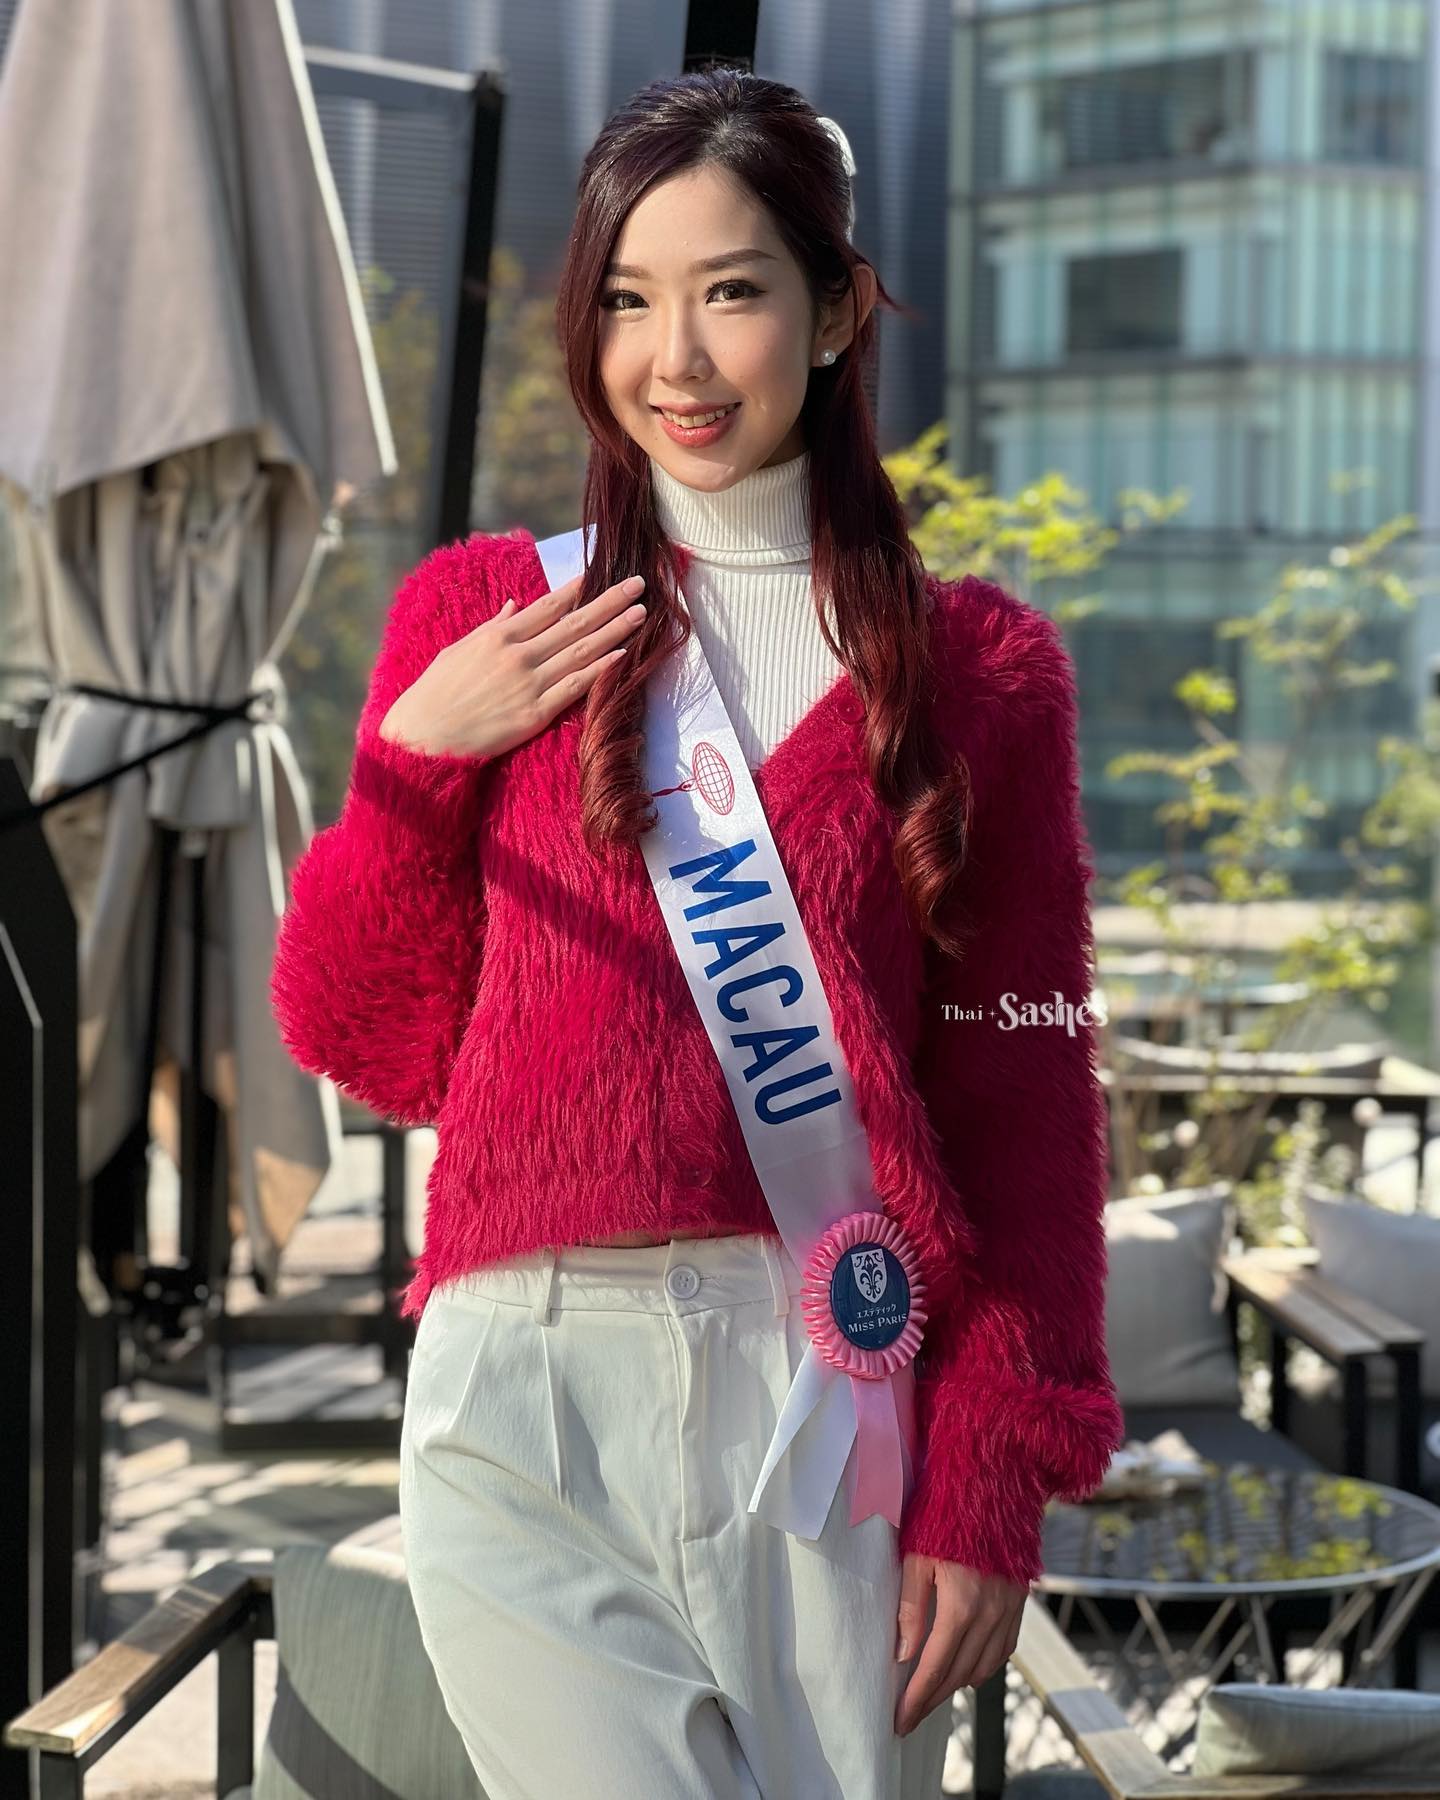 ♔♔♔♔♔ ROAD TO MISS INTERNATIONAL 2022 ♔♔♔♔♔ - Page 8 31884210